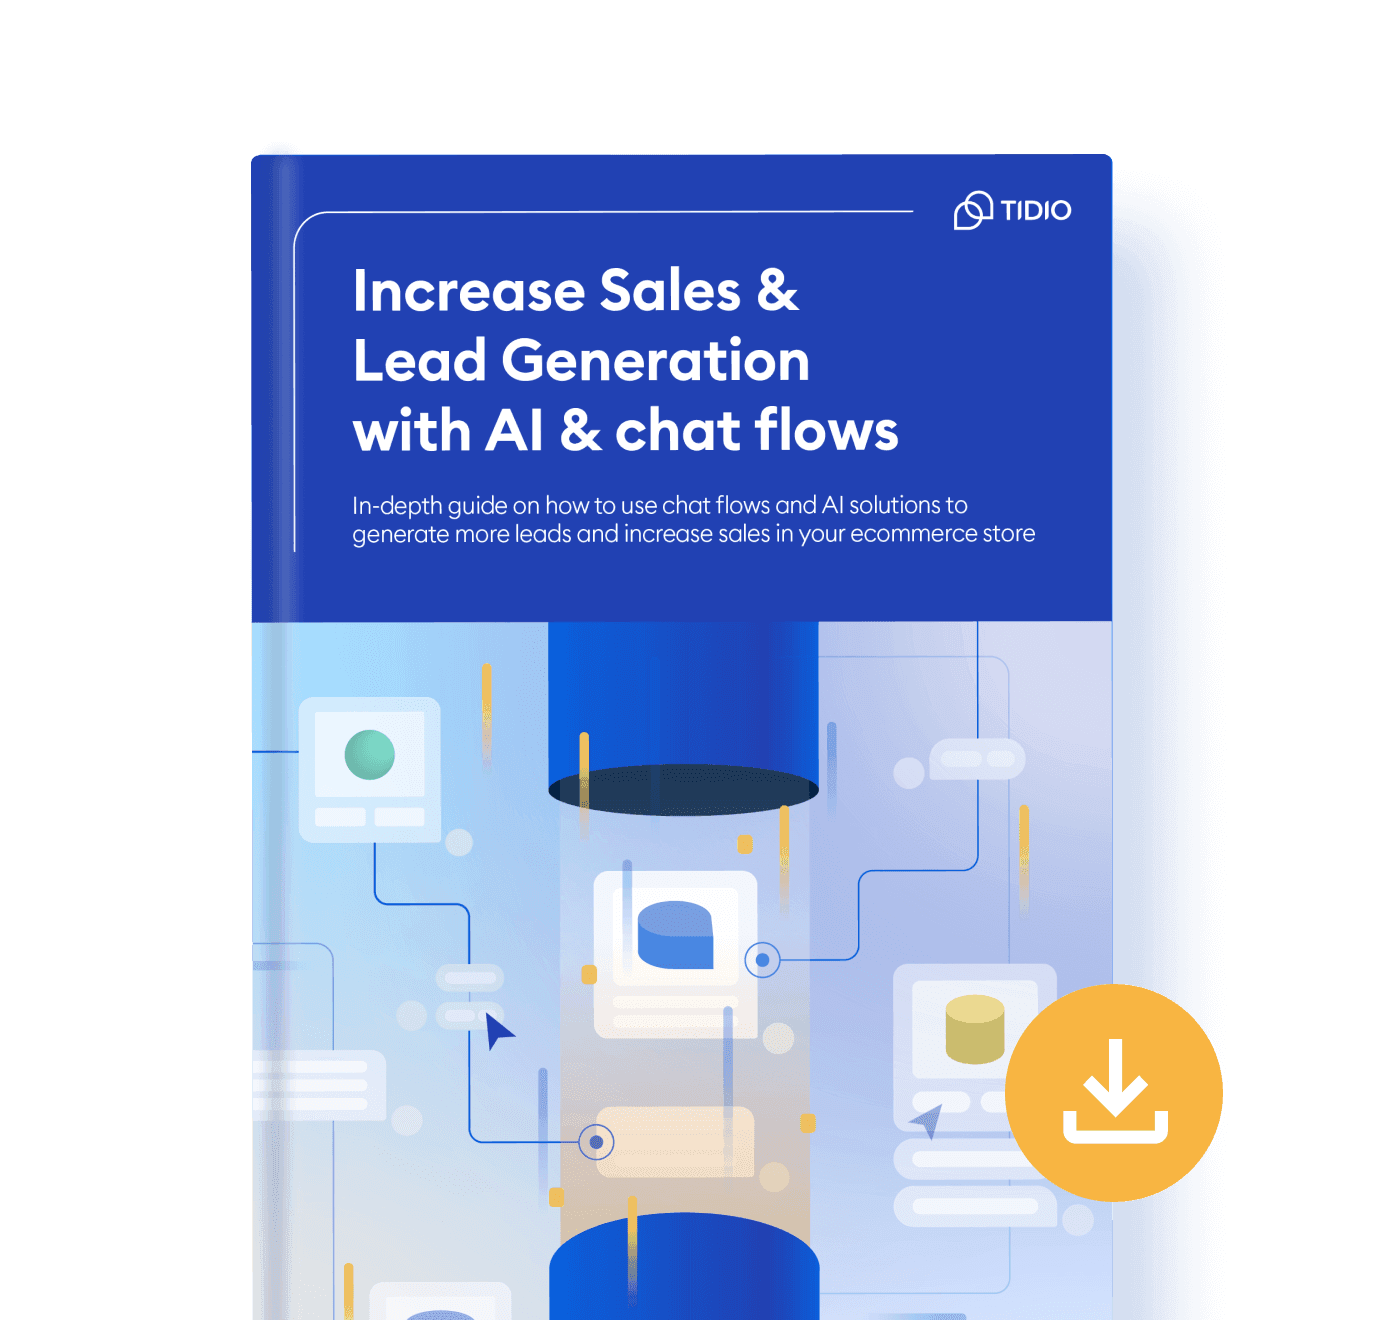 Automate Sales and Lead Generation with AI & Flows